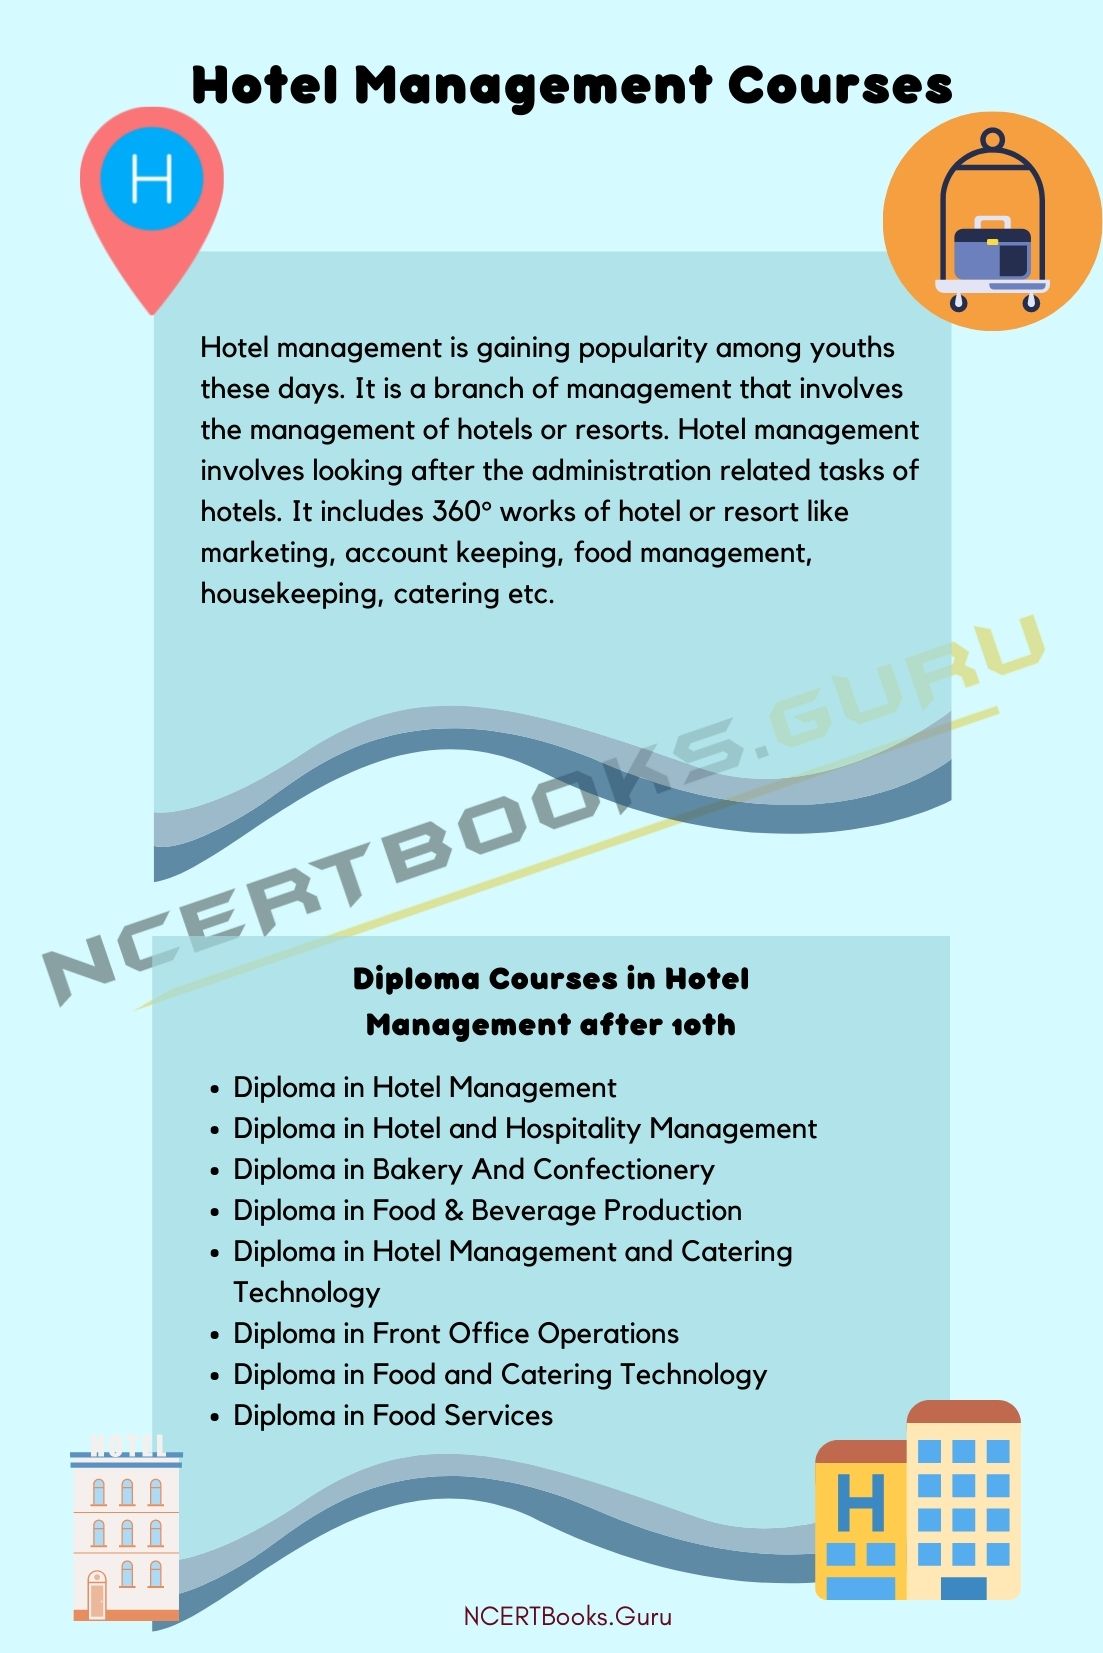 Hotel Management Courses after 10th 2